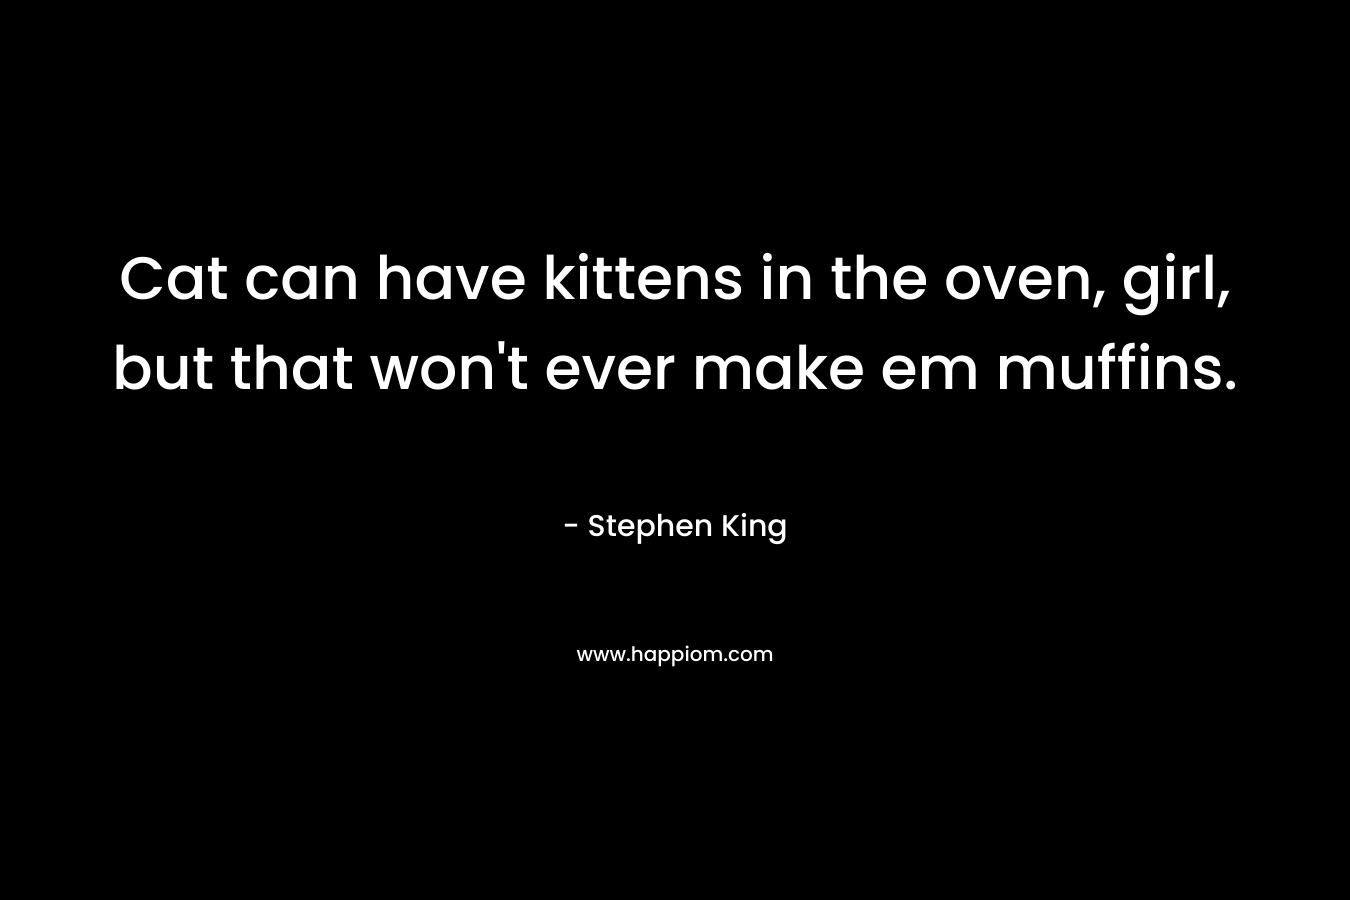 Cat can have kittens in the oven, girl, but that won’t ever make em muffins. – Stephen King